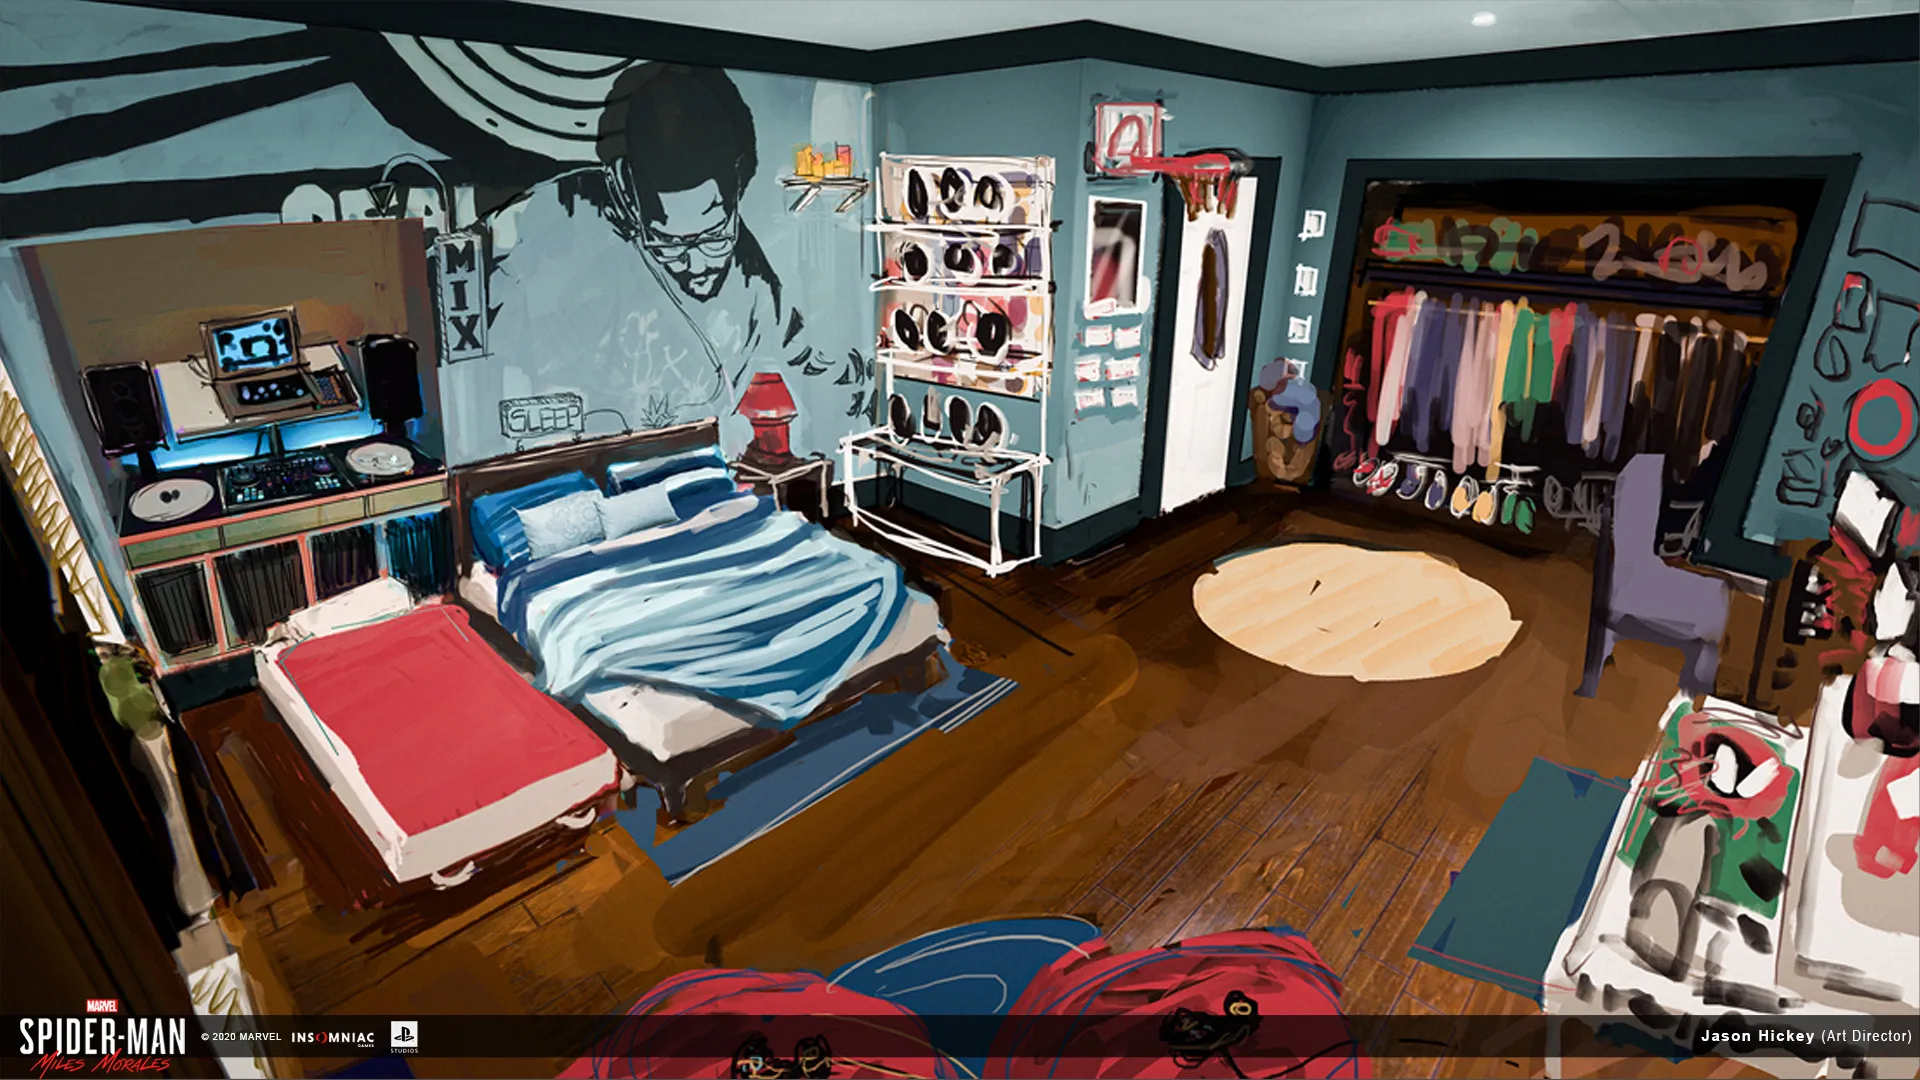 wp-content/uploads/2020/11/jhickey_smmilesmorales__Miles_New_room_end.jpg